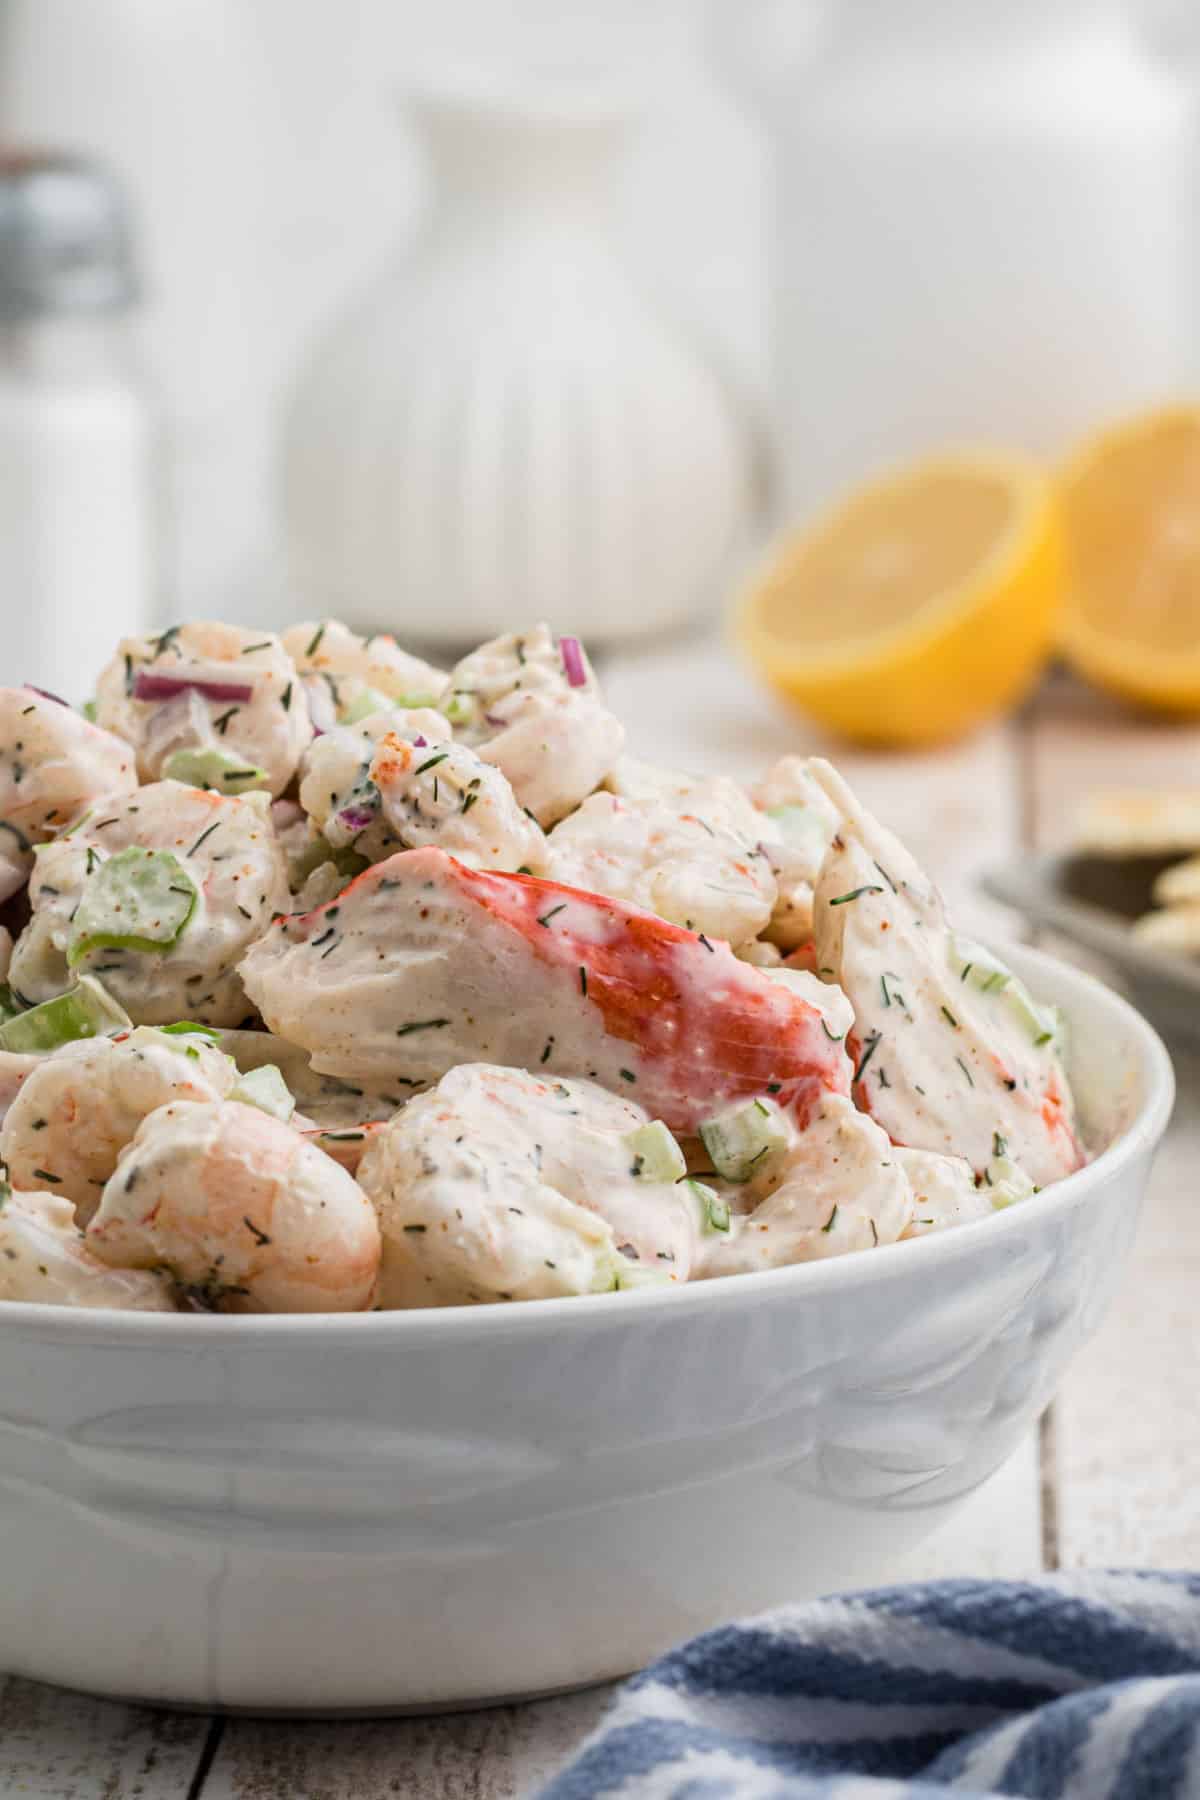 A close up of a dish heaped with southern seafood salad with some lemons in the background.